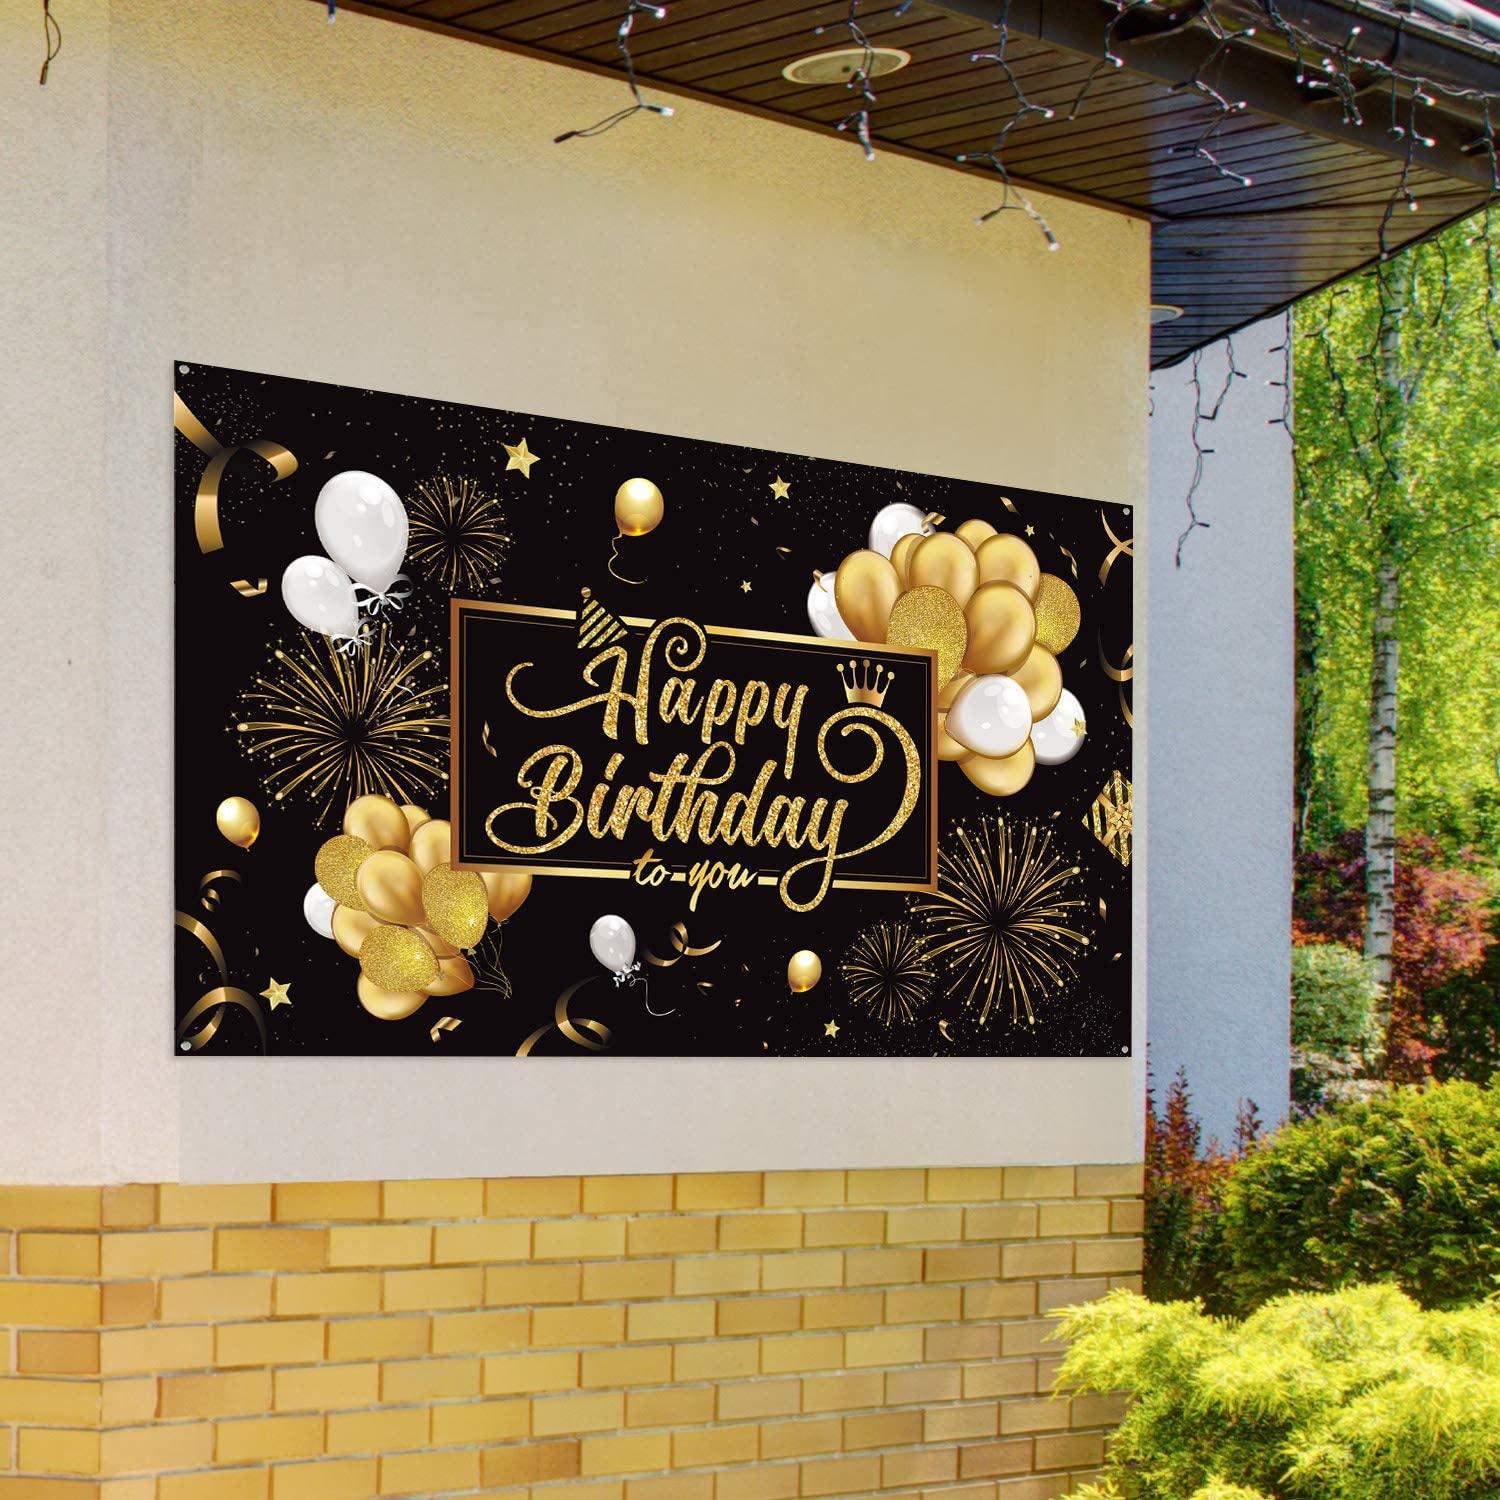 Happy Birthday Backdrop Banner Black and Gold Sign Poster Large Fabric Glitter Balloon Fireworks Sign - Decotree.co Online Shop